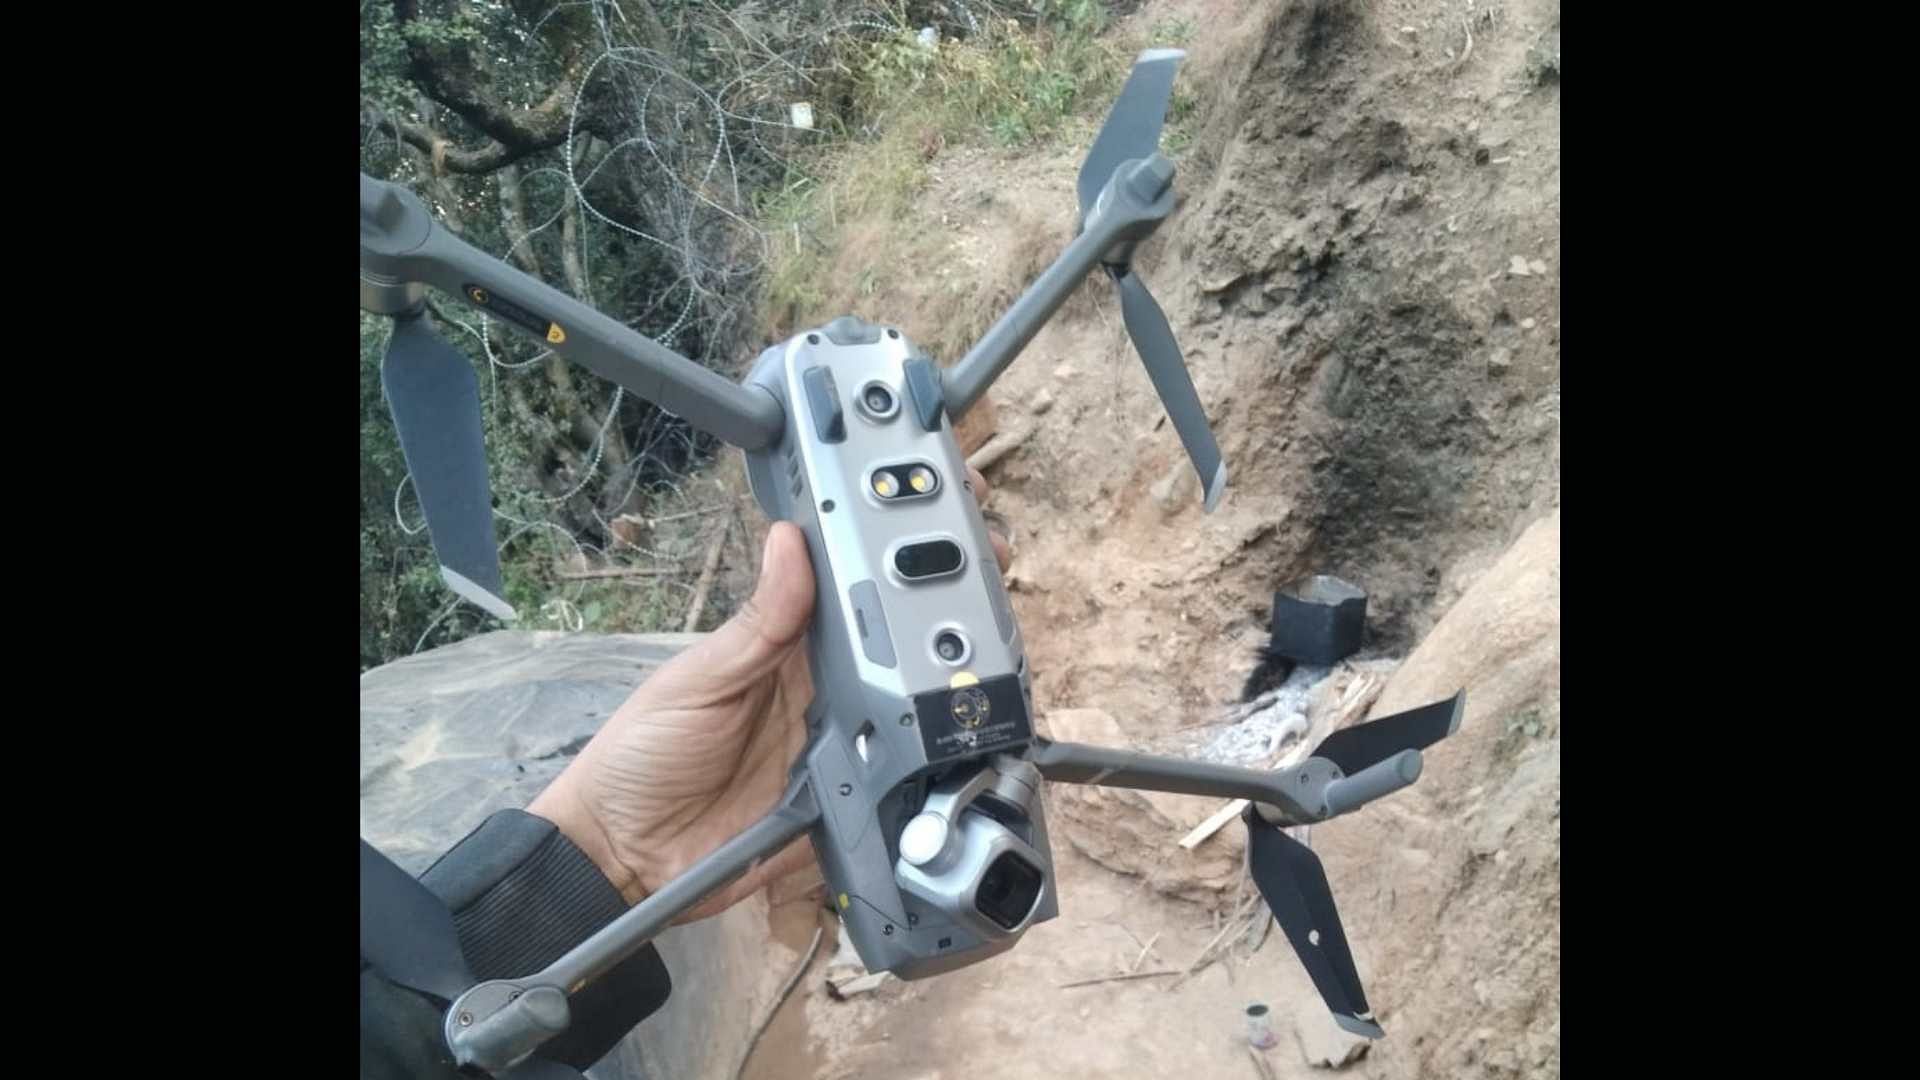 The quadcopter is a DJI Mavic 2 Pro model, the official account of the Chinar Corps tweeted.